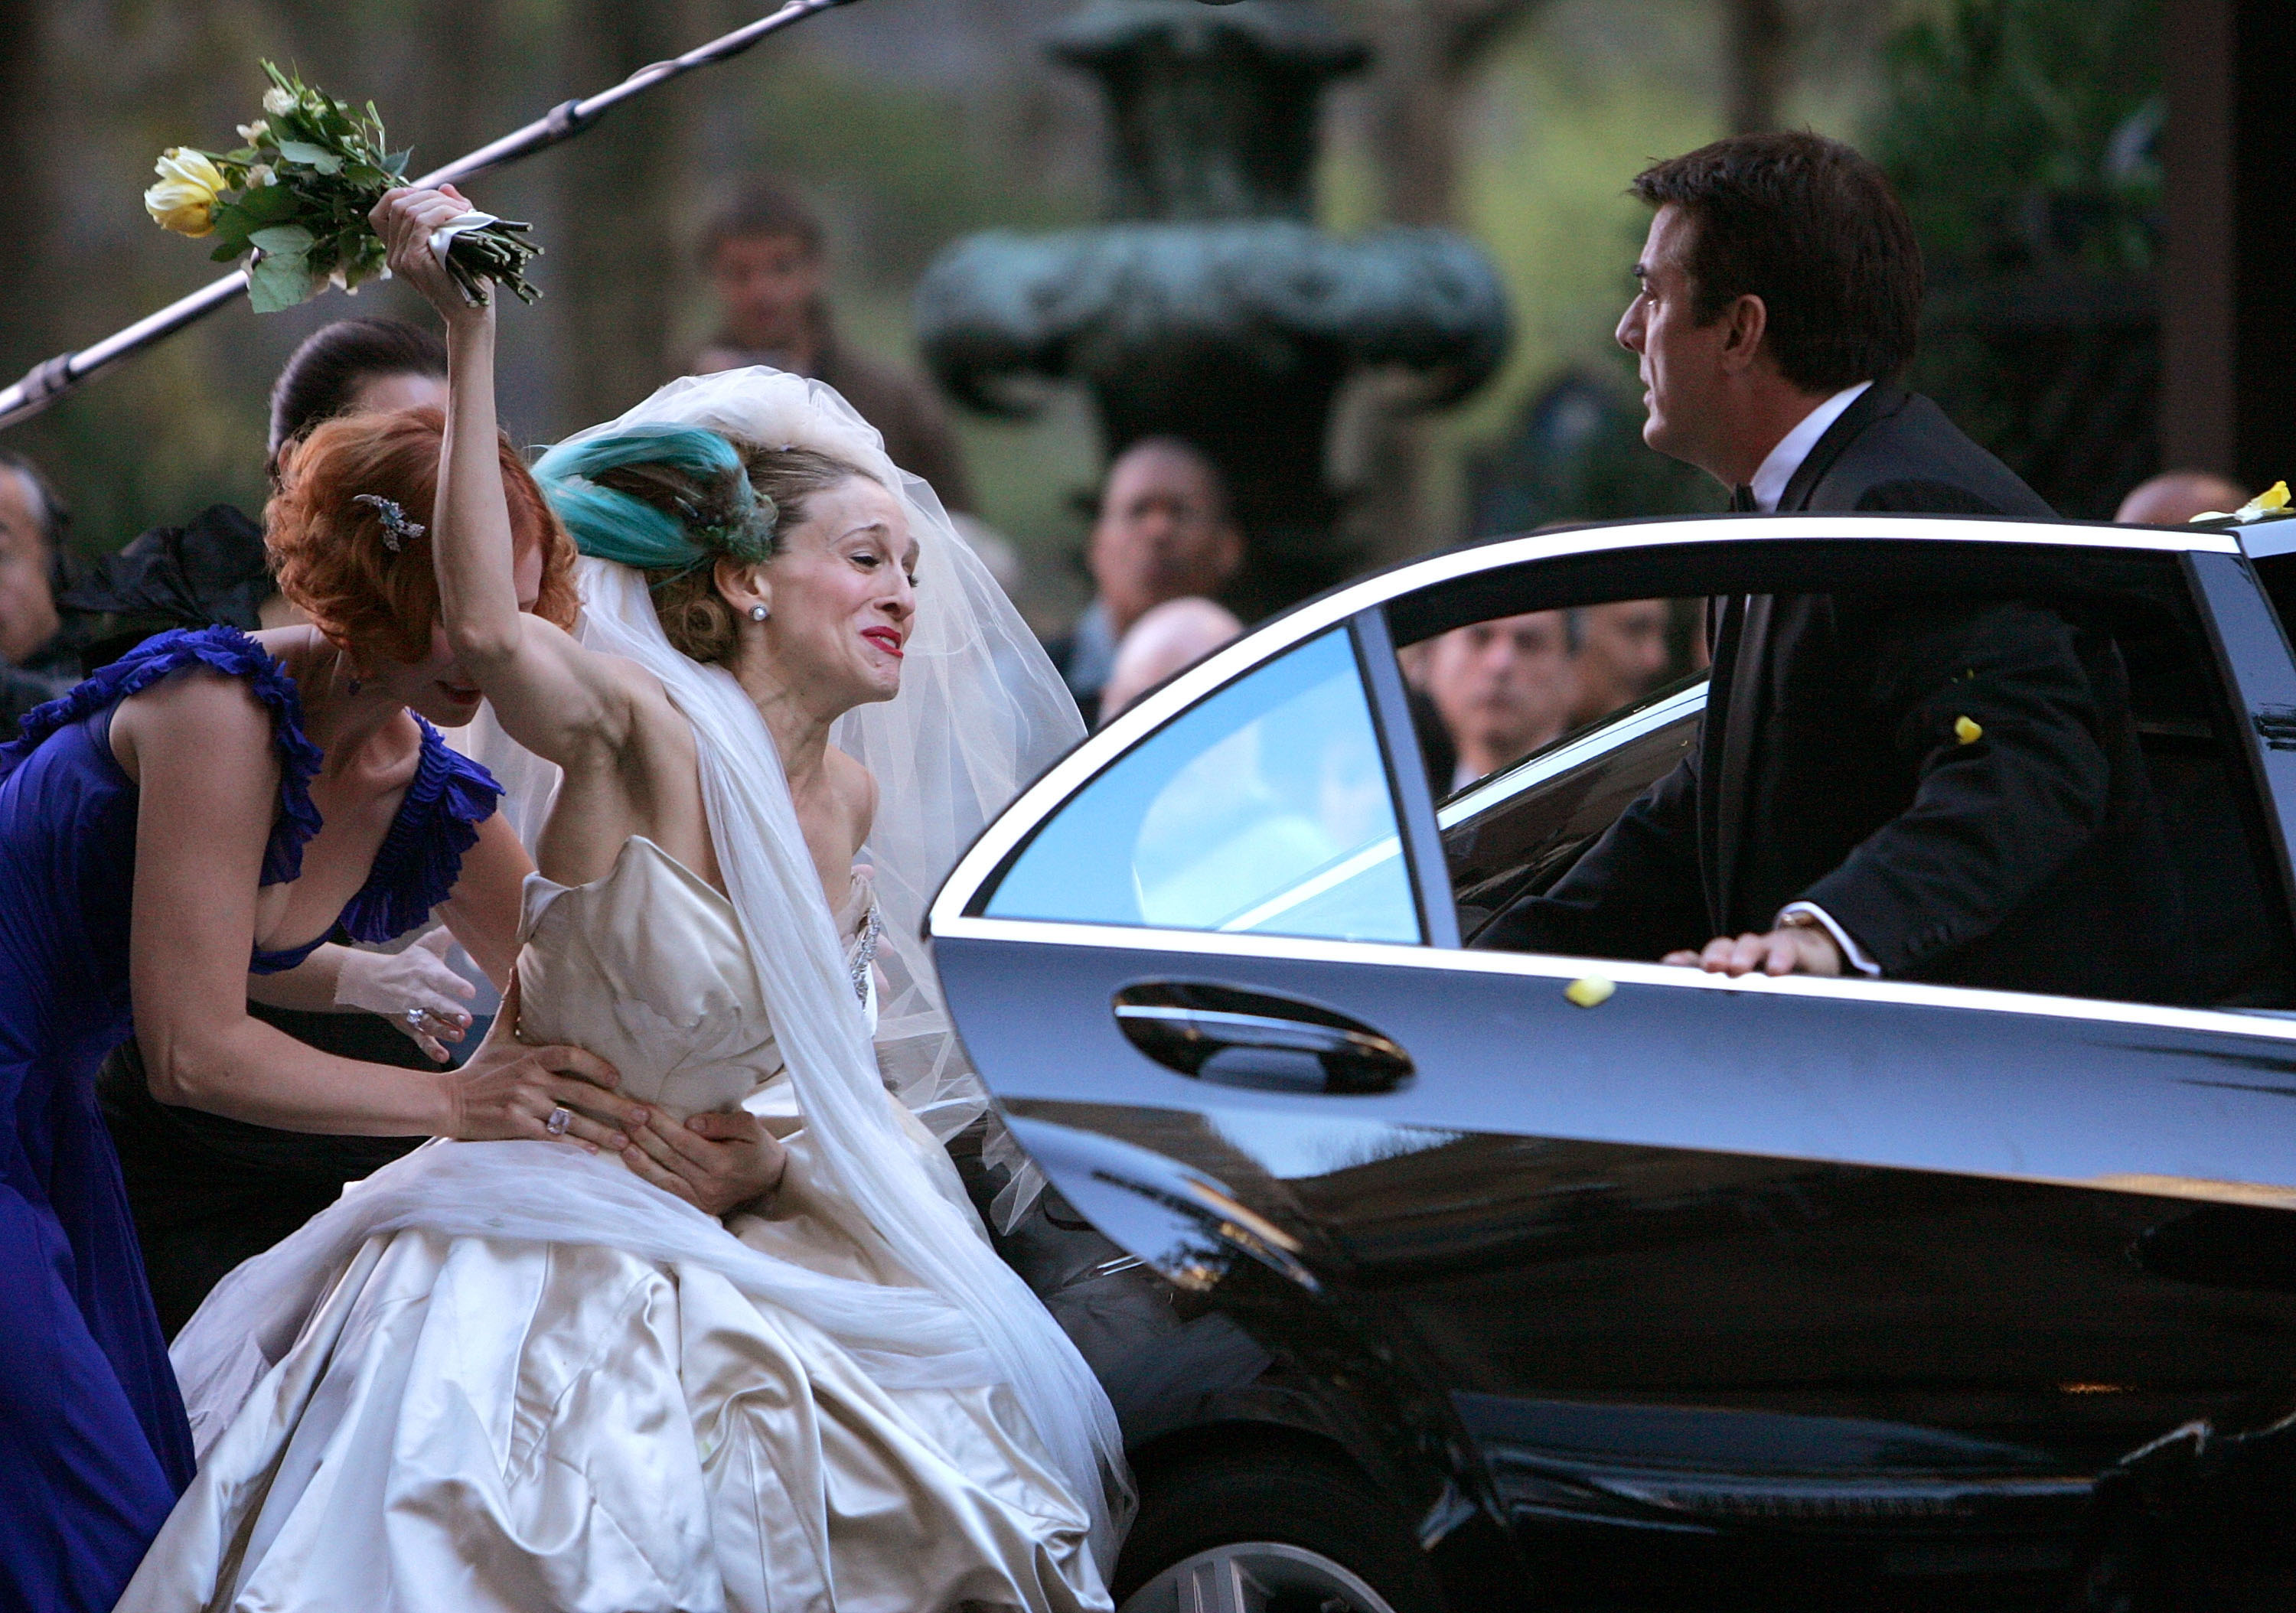 Cynthia Nixon, Sarah Jessica Parker and Chris Noth on the set of "Sex and the City: The Movie" on October 12, 2007